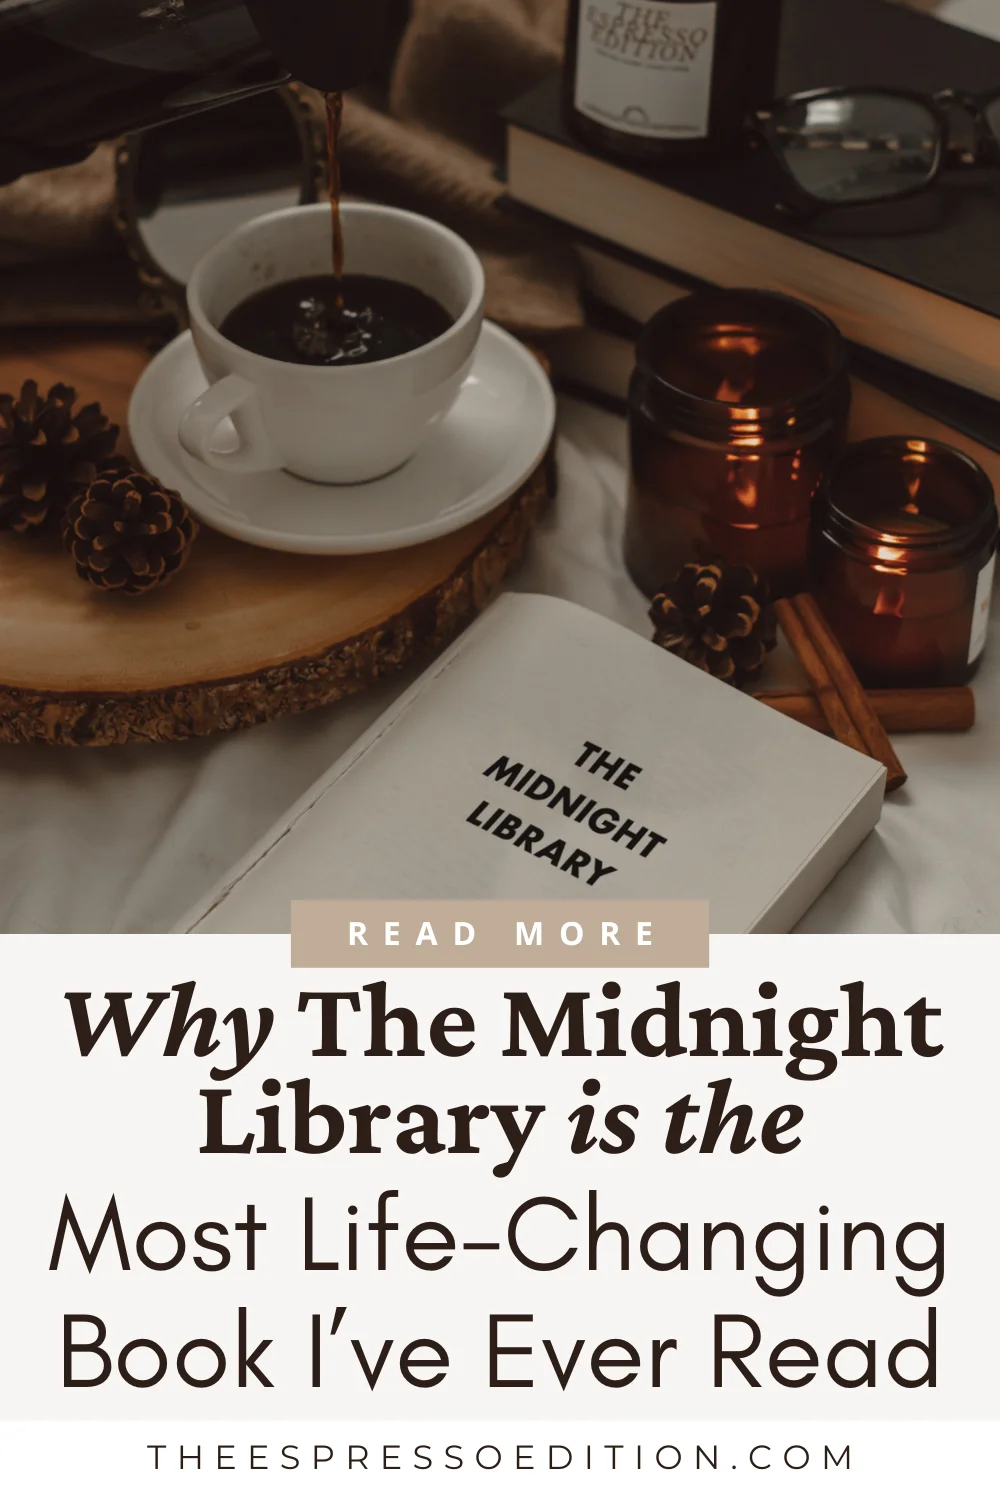 Why "The Midnight Library" Is the Most Life-Changing Book I've Ever Read by The Espresso Edition cozy bookish blog